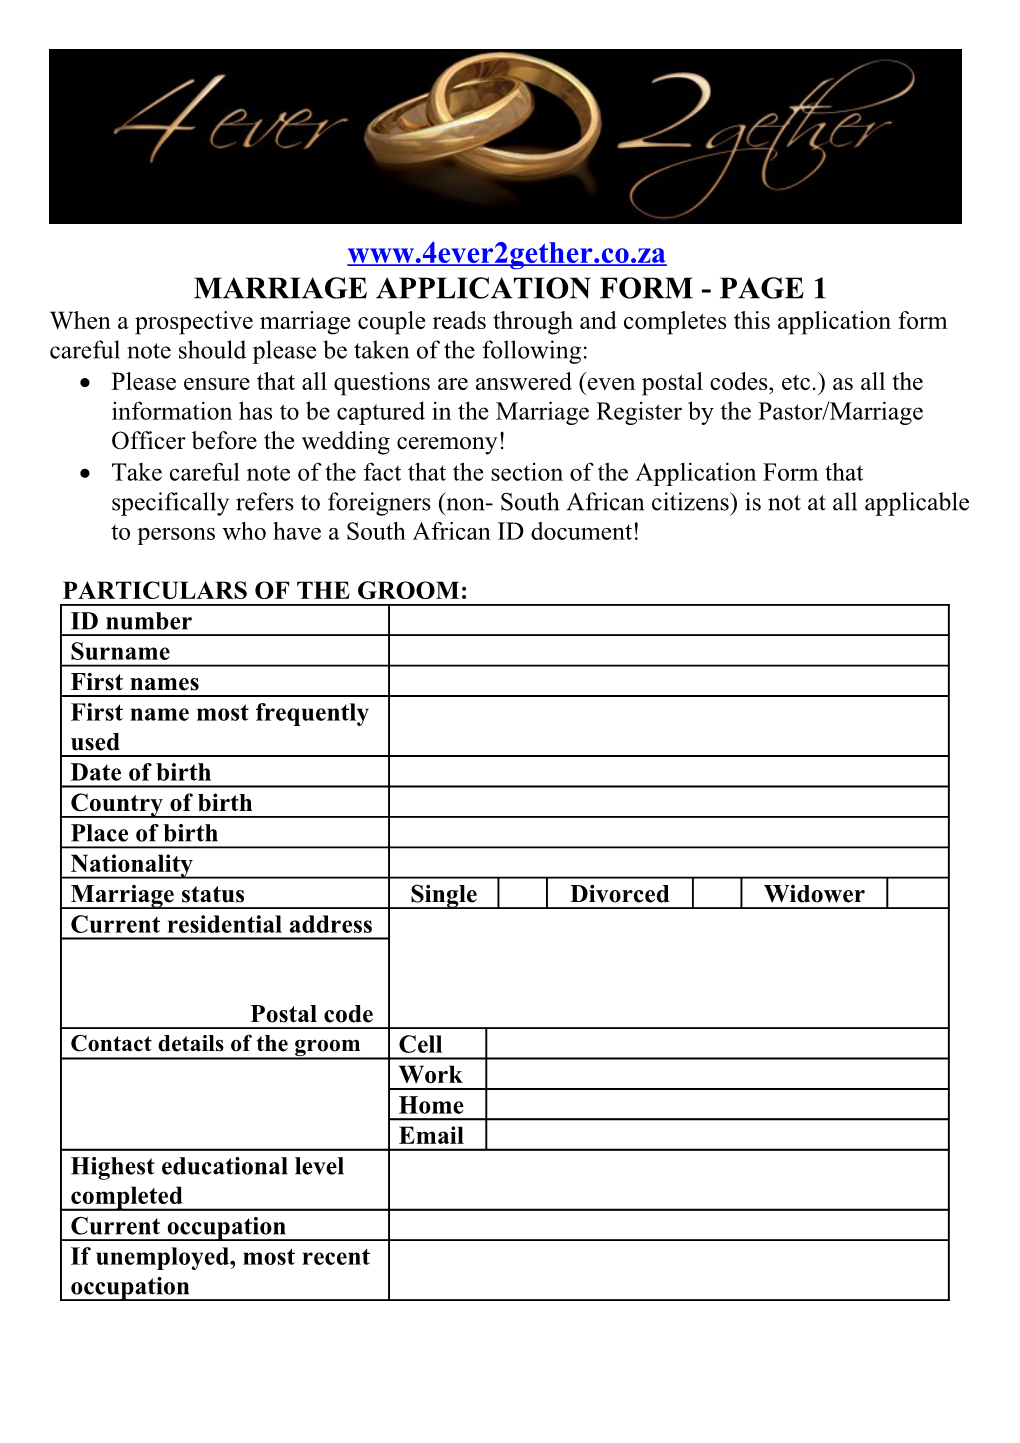 Marriage Application Form - Page 1